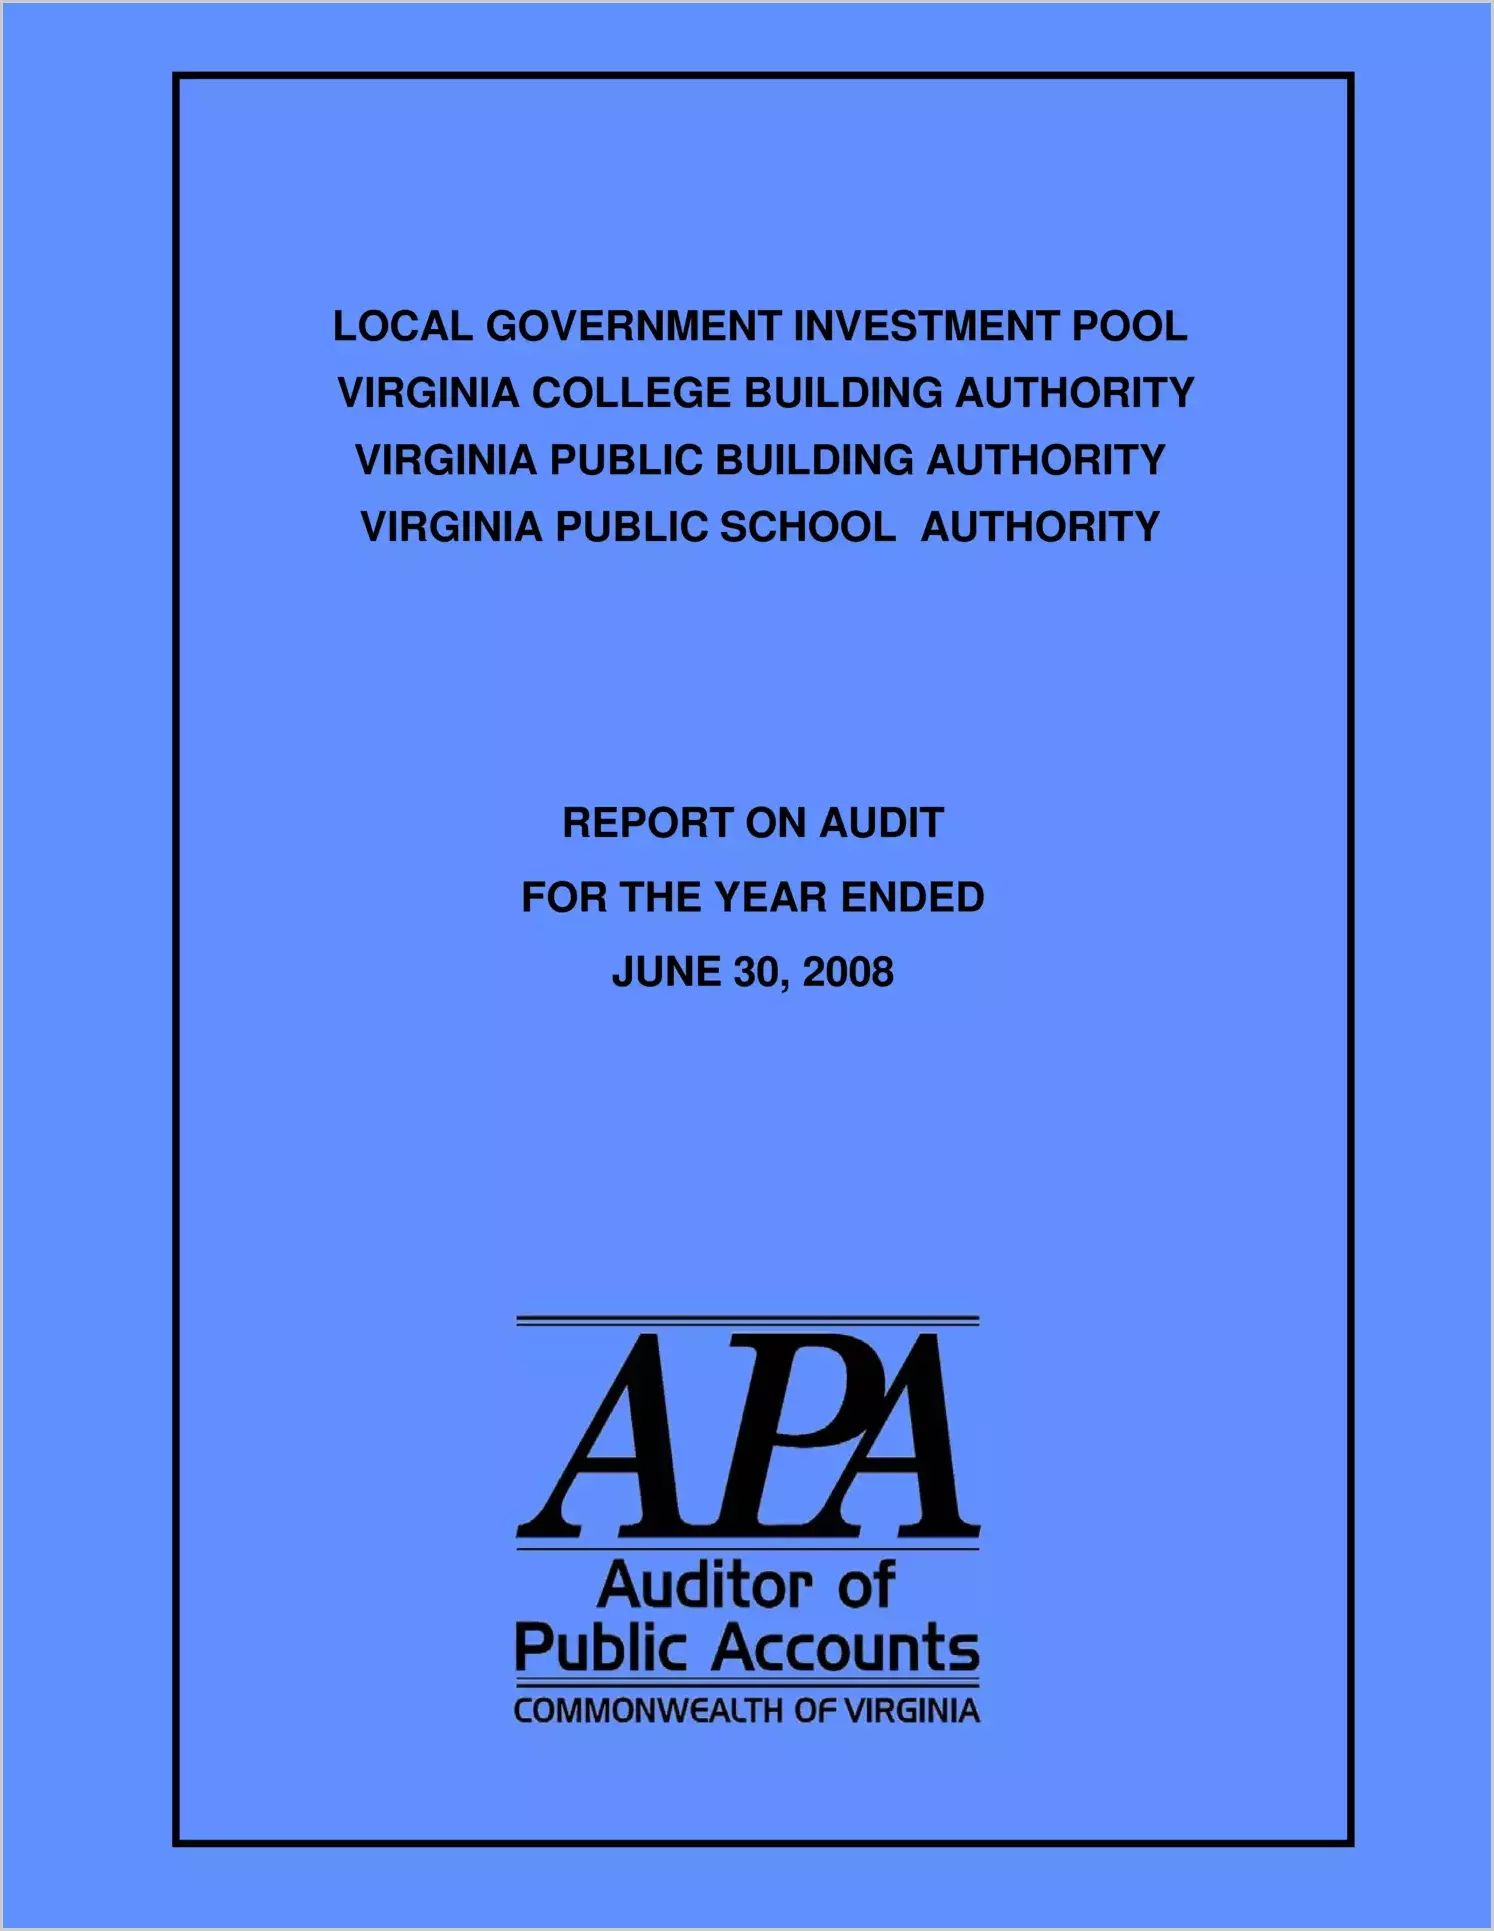 Local Government Investment Pool, Virginia College Building Authority, Virginia Public Building Authority, Virginia Public School Authority Report on Audit for Period Ended June 30, 2008